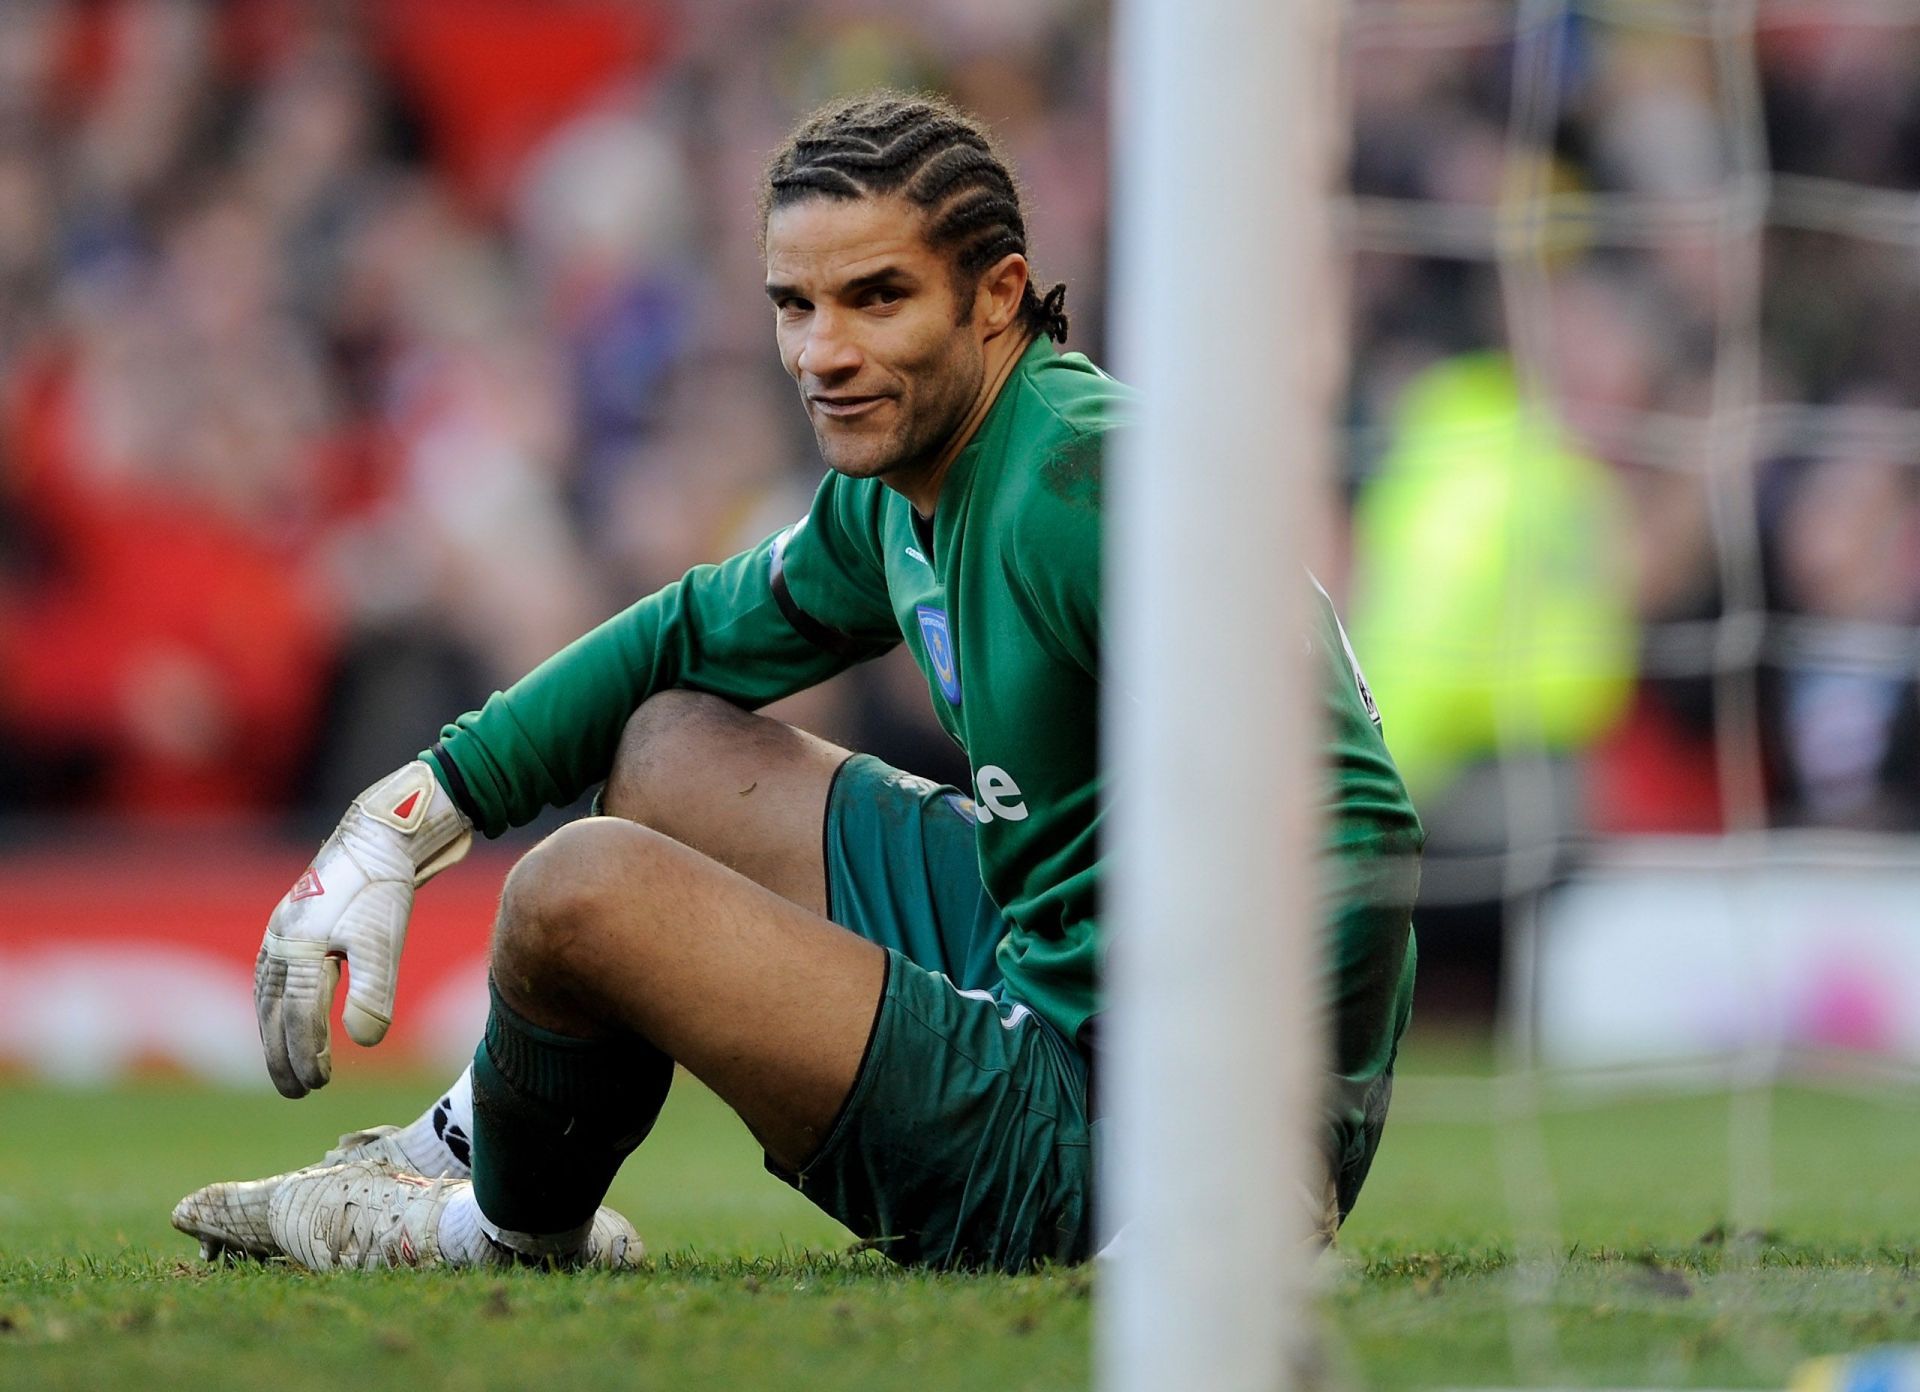 David James played for a number of English clubs